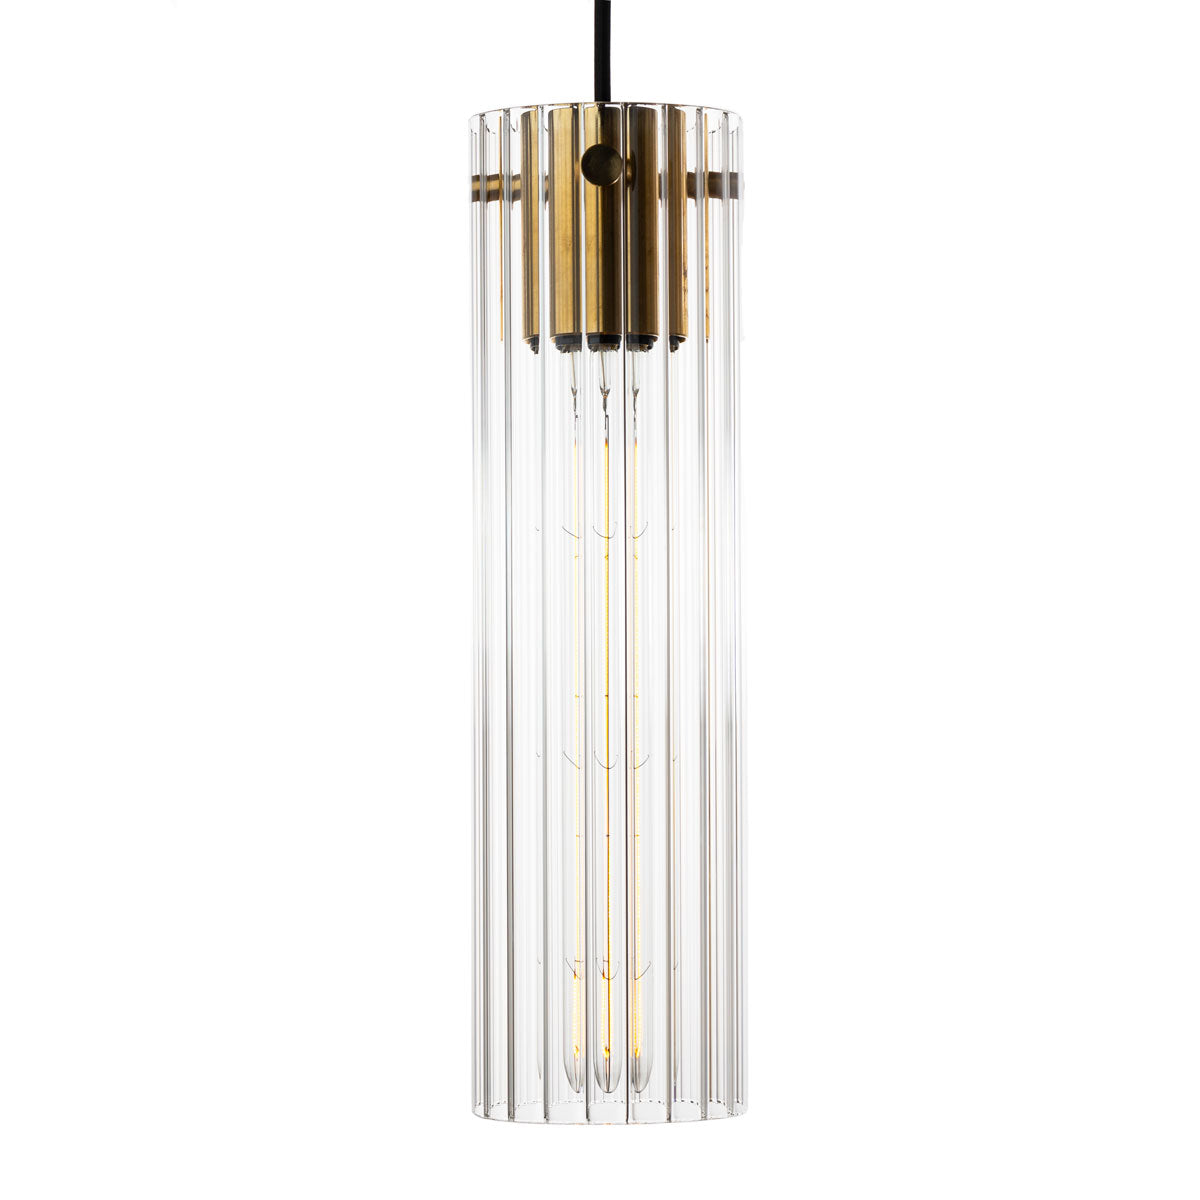 Temple ribbed glass pendant lighting sold by South Charlotte Fine Lighting